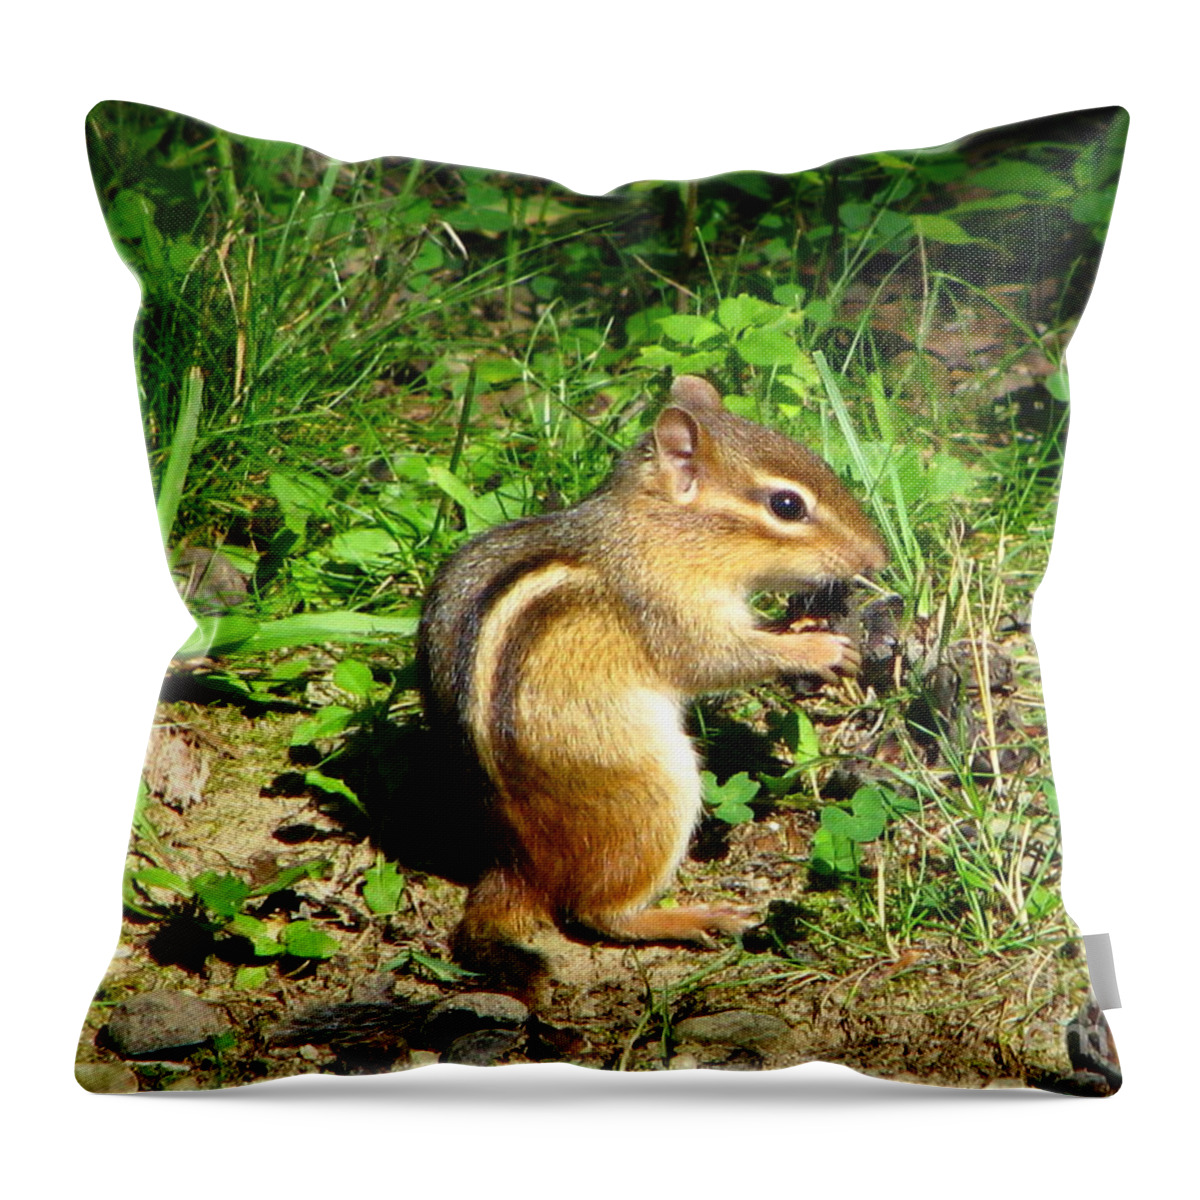 Chipmunk Throw Pillow featuring the photograph Chippy by Michael Krek